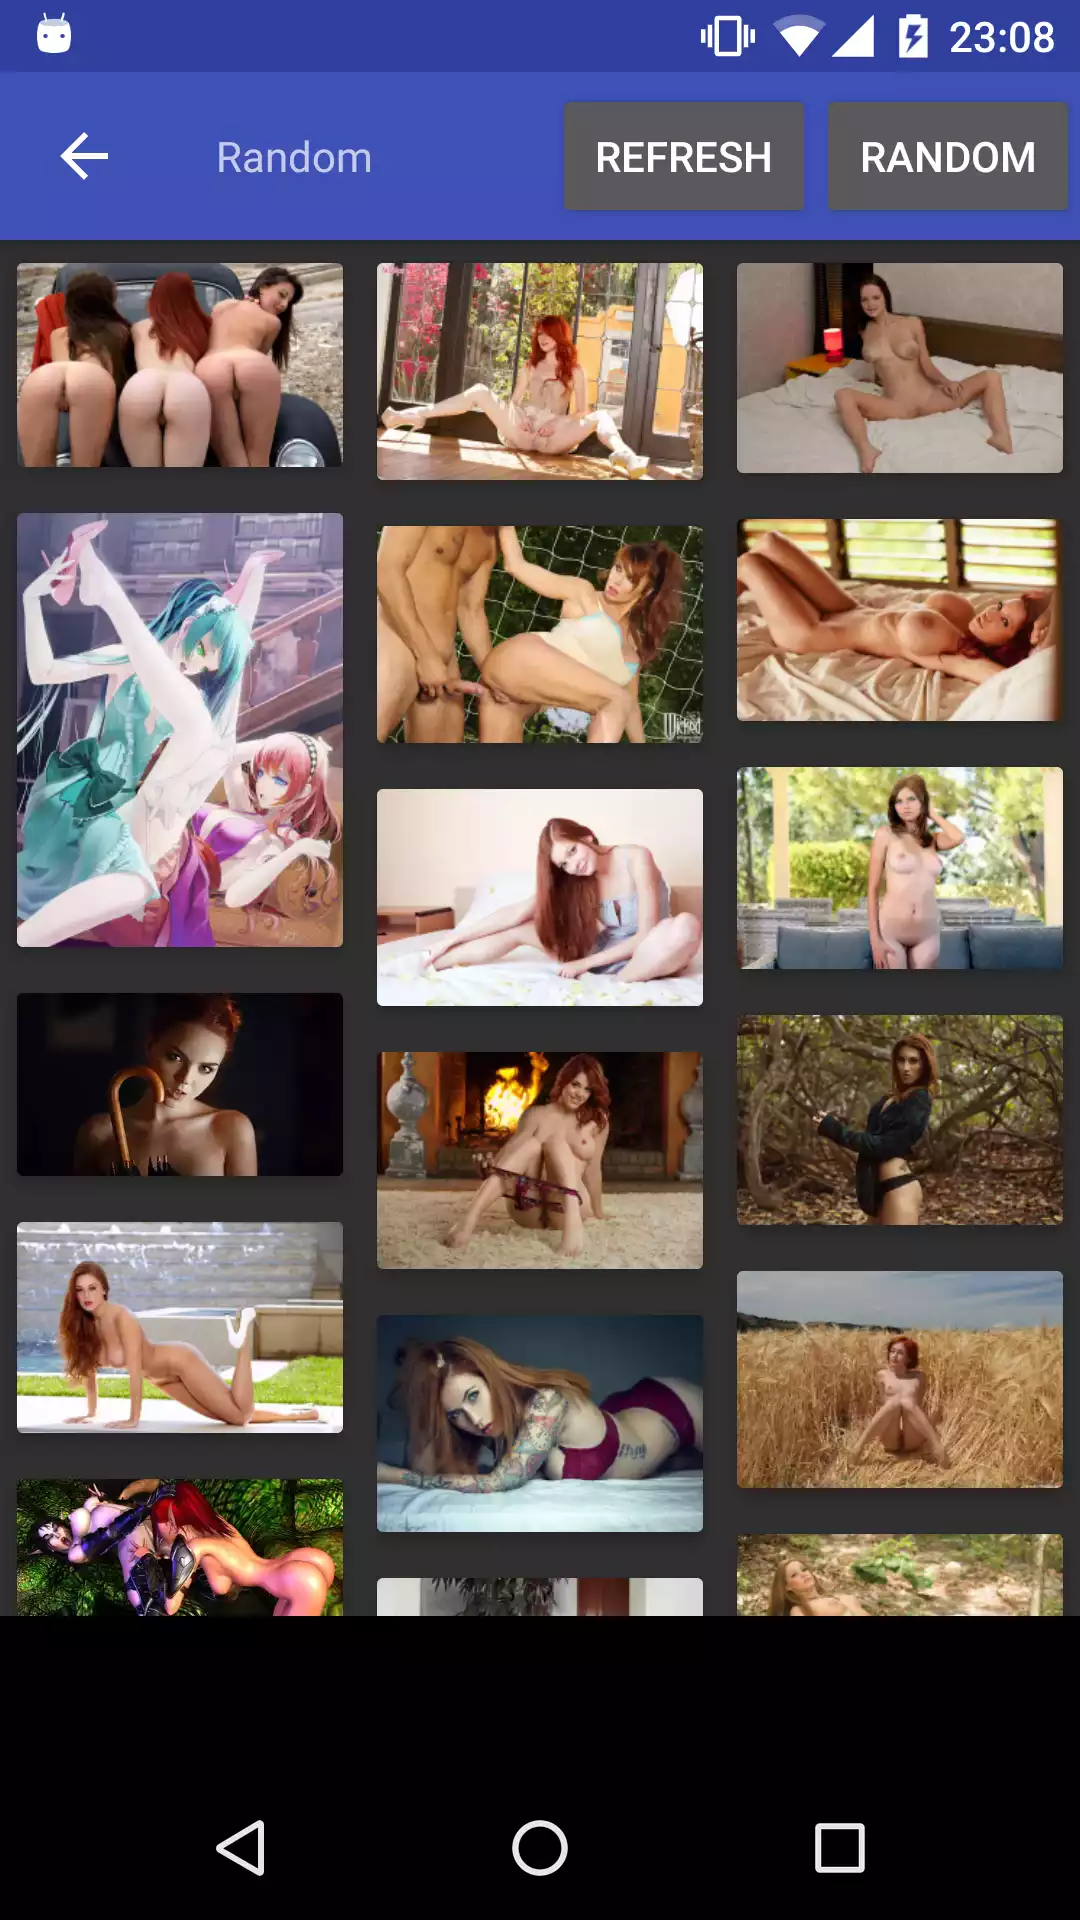 Sexy Redhead wallpapers mature,erotic,apk,wallpapers,backgrounds,photo,ios,hentie,amateur,app,ster,download,black,apps,pics,pornstar,hentai,pornstars,hot,porn,redhead,pictures,mobile,sexy